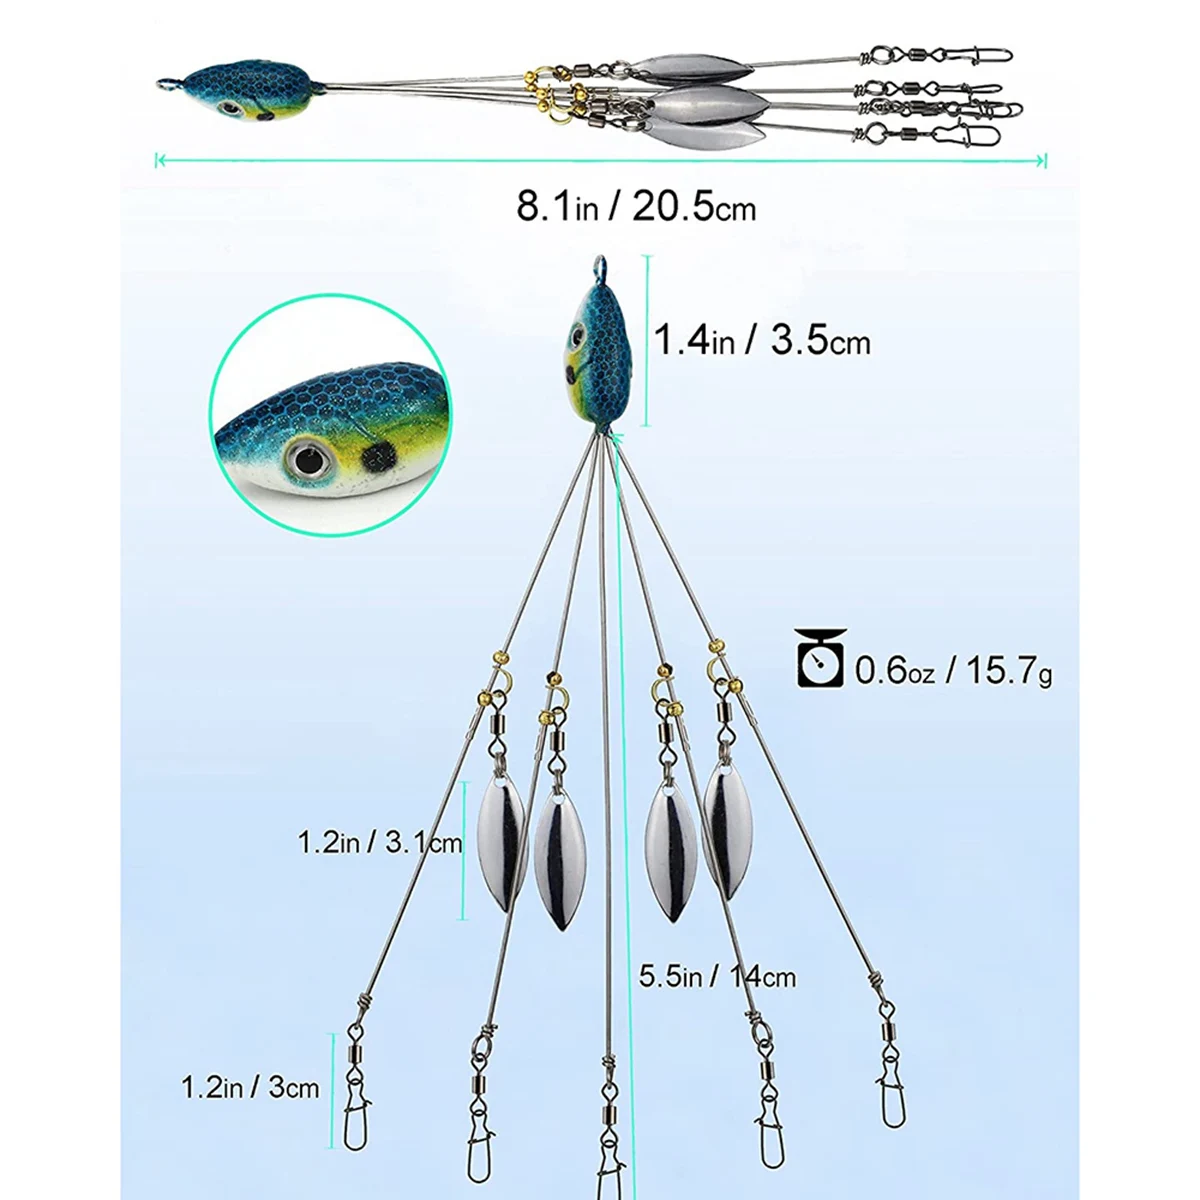 Alabama Umbrella Rigs for Bass Stripers Fishing, Freshwater